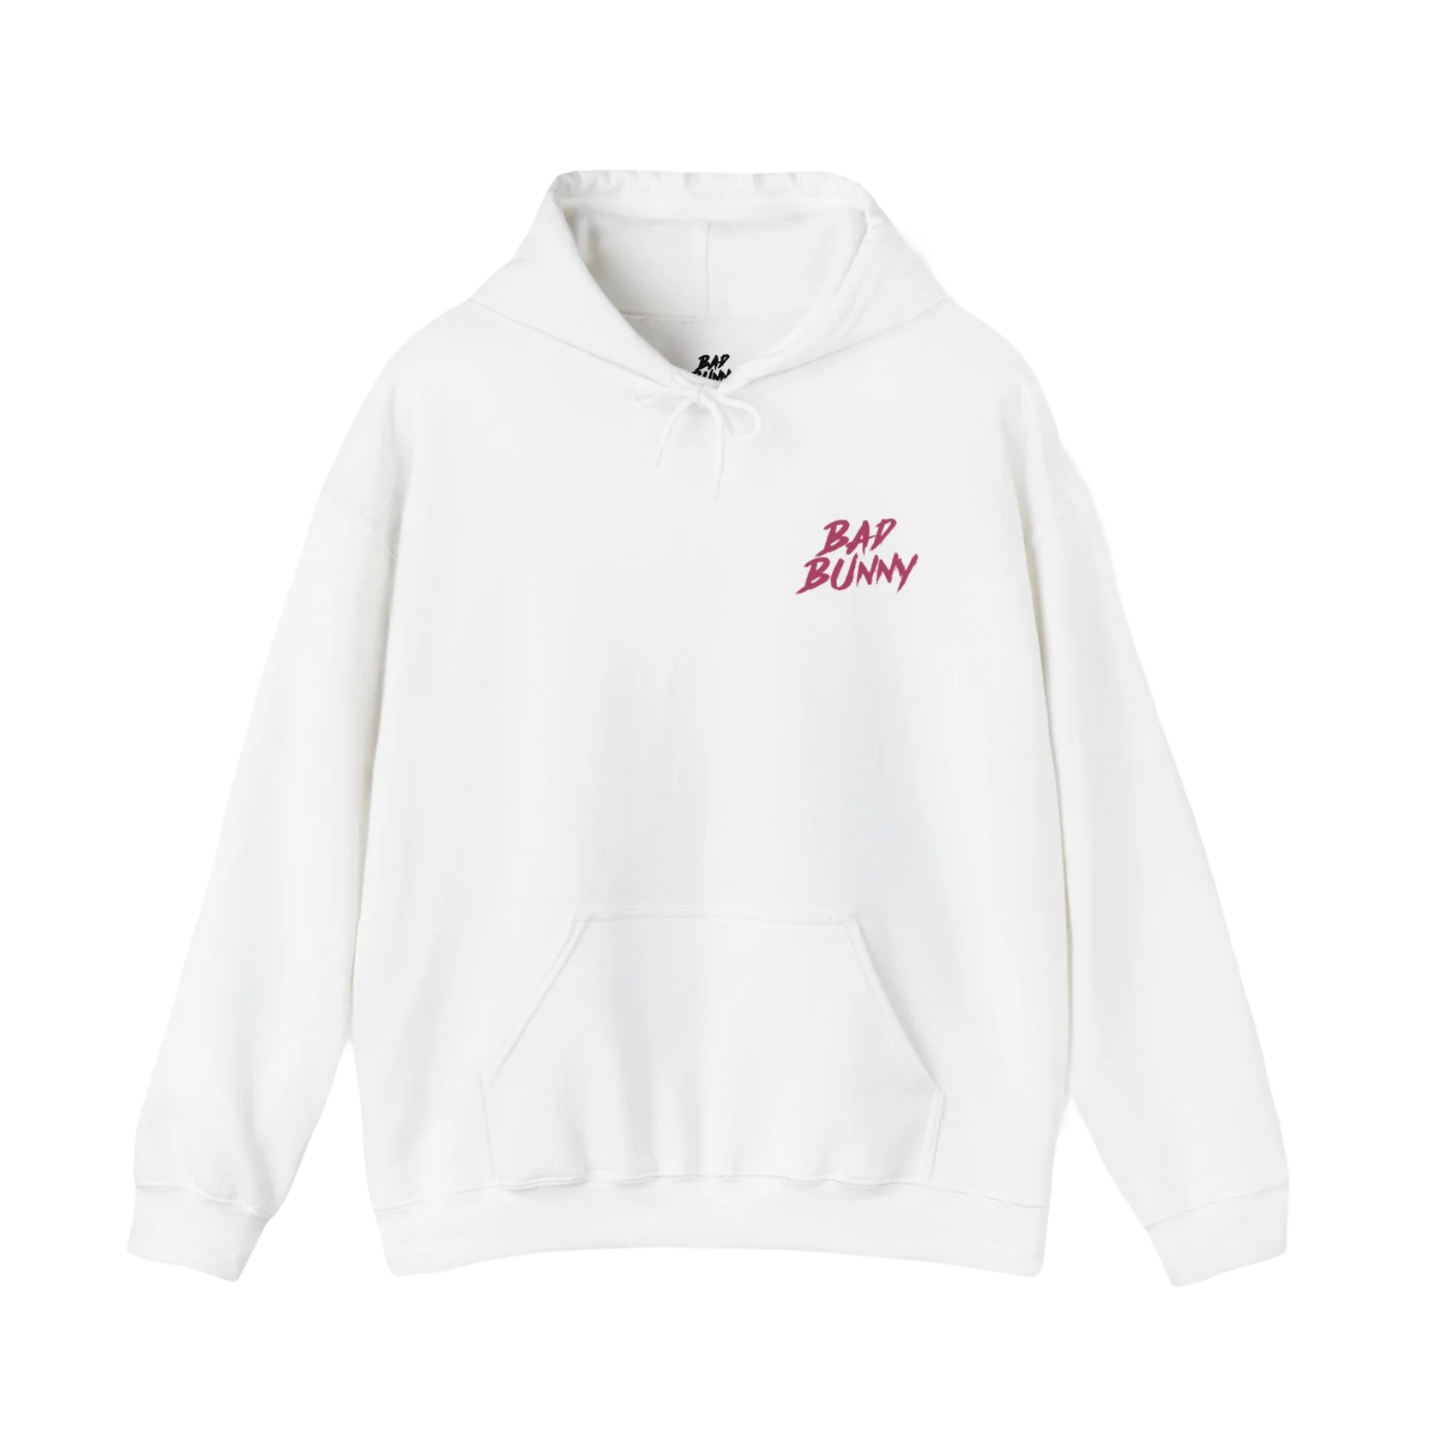 MOST WANTED TOUR - SIGNATURE REAL FAN HOODIE WHITE